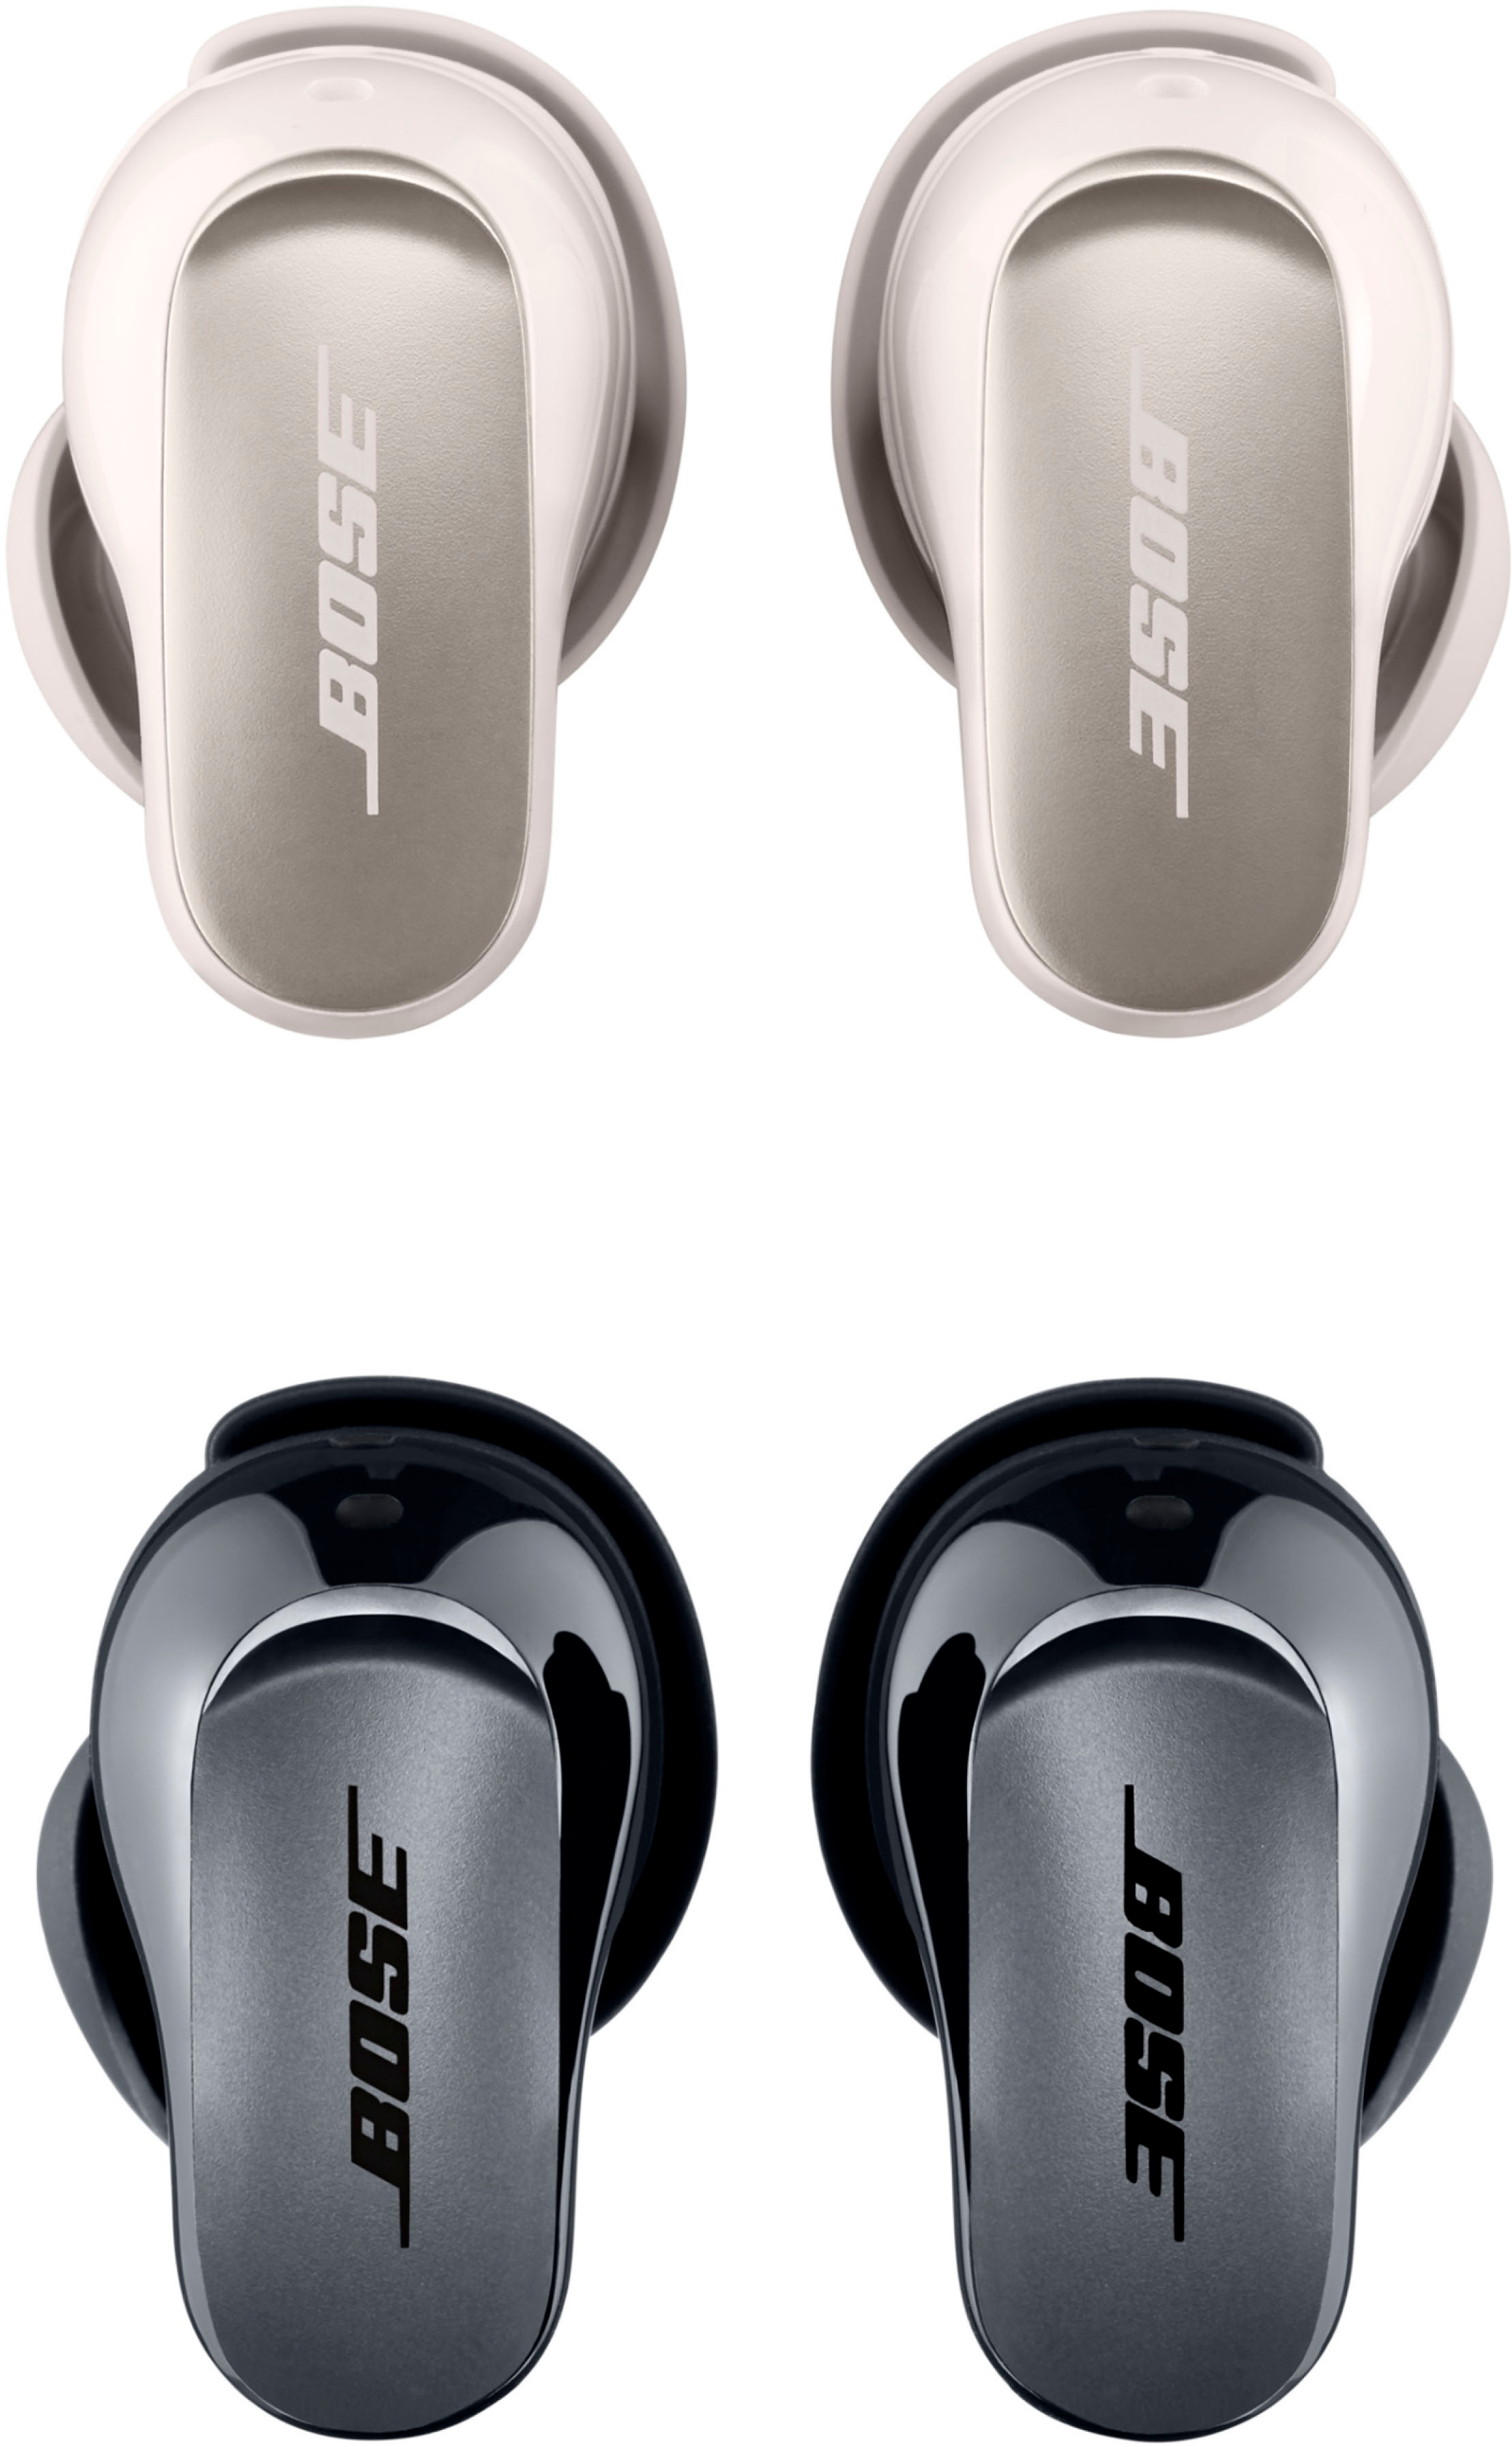 Bose QuietComfort Ultra Wireless Black Noise Cancelling Earbuds